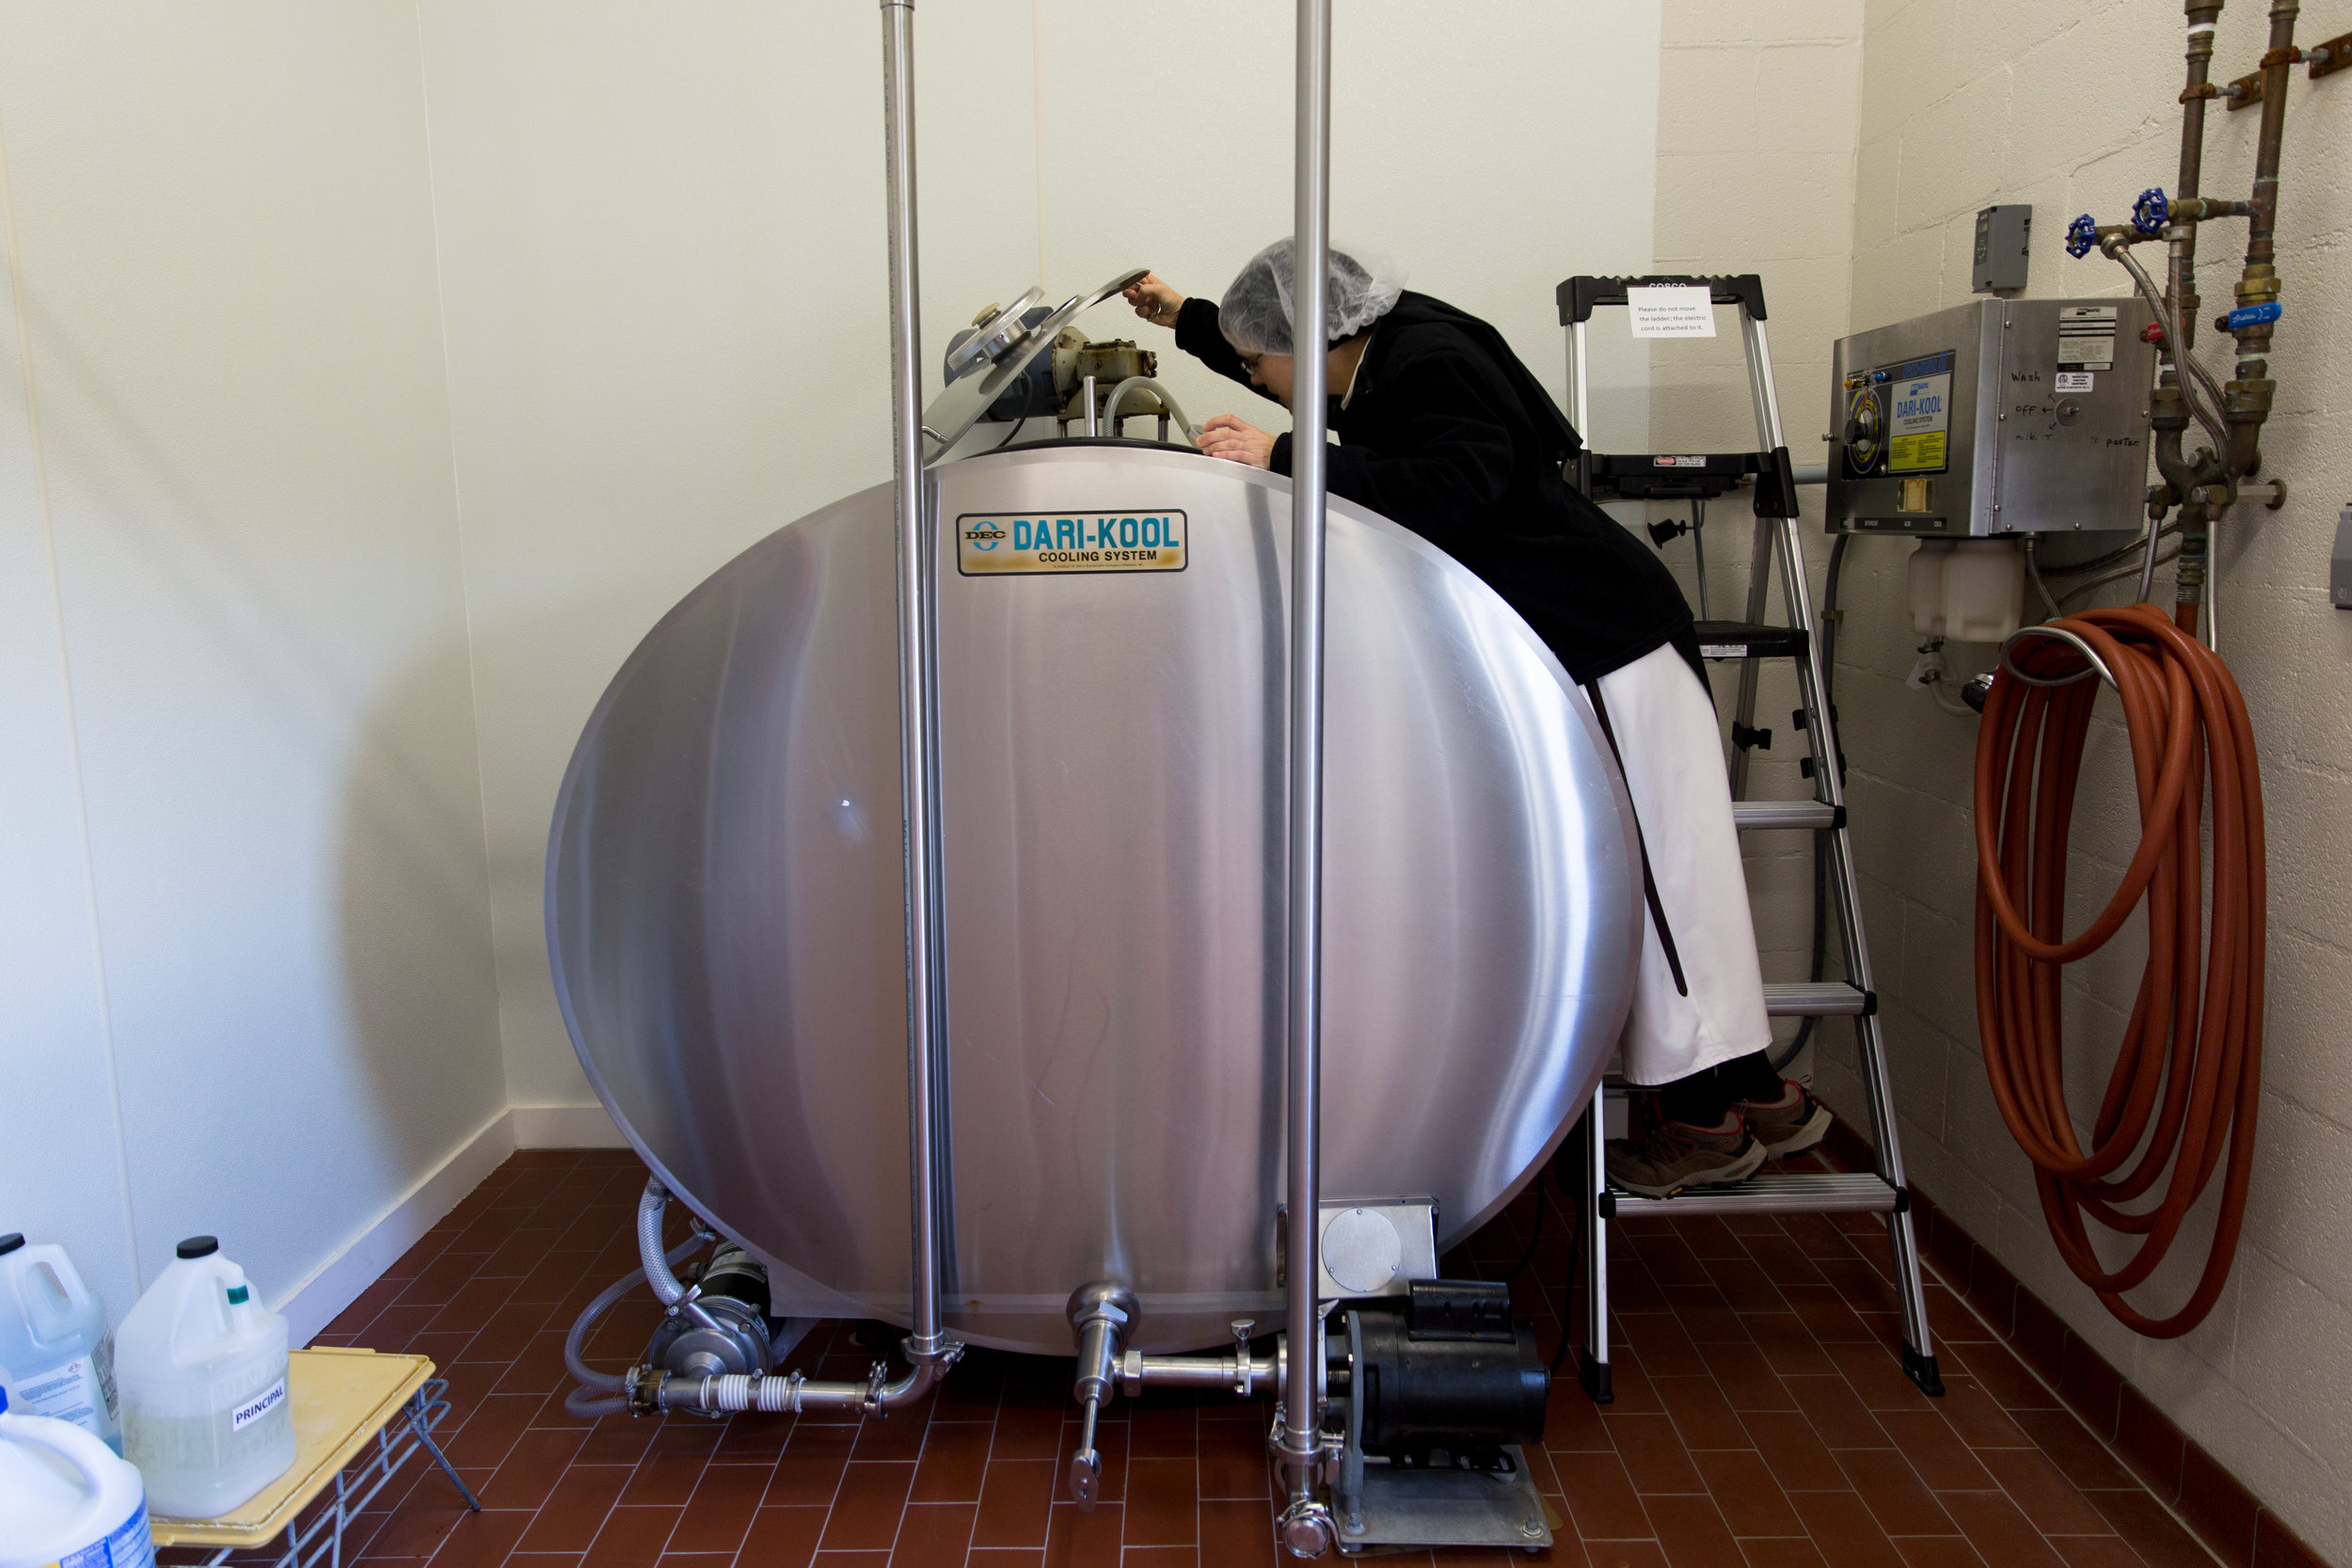  Sister Maria checks on the empty milk tank before delivery March 4, 2019 in Crozet, Virginia. "We get our milk delivered regularly and locally. We like to know where everything is coming from and exactly what gets put in," Maria said. 